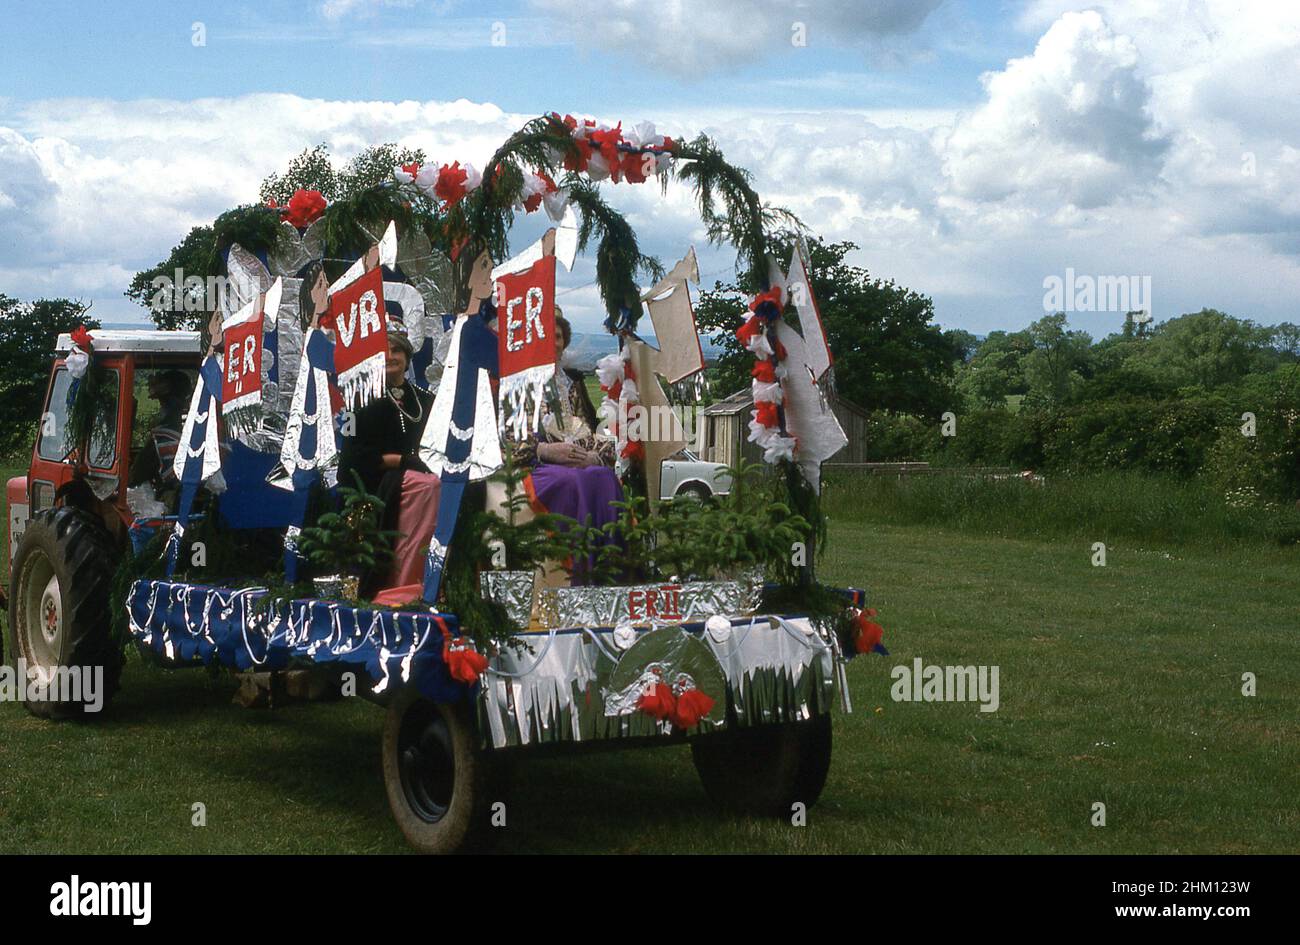 1977, historical, on the back of a tractor, a decorated parade float celebrating the Queen Elizabeth II silver jubilee, England, UK. Stock Photo